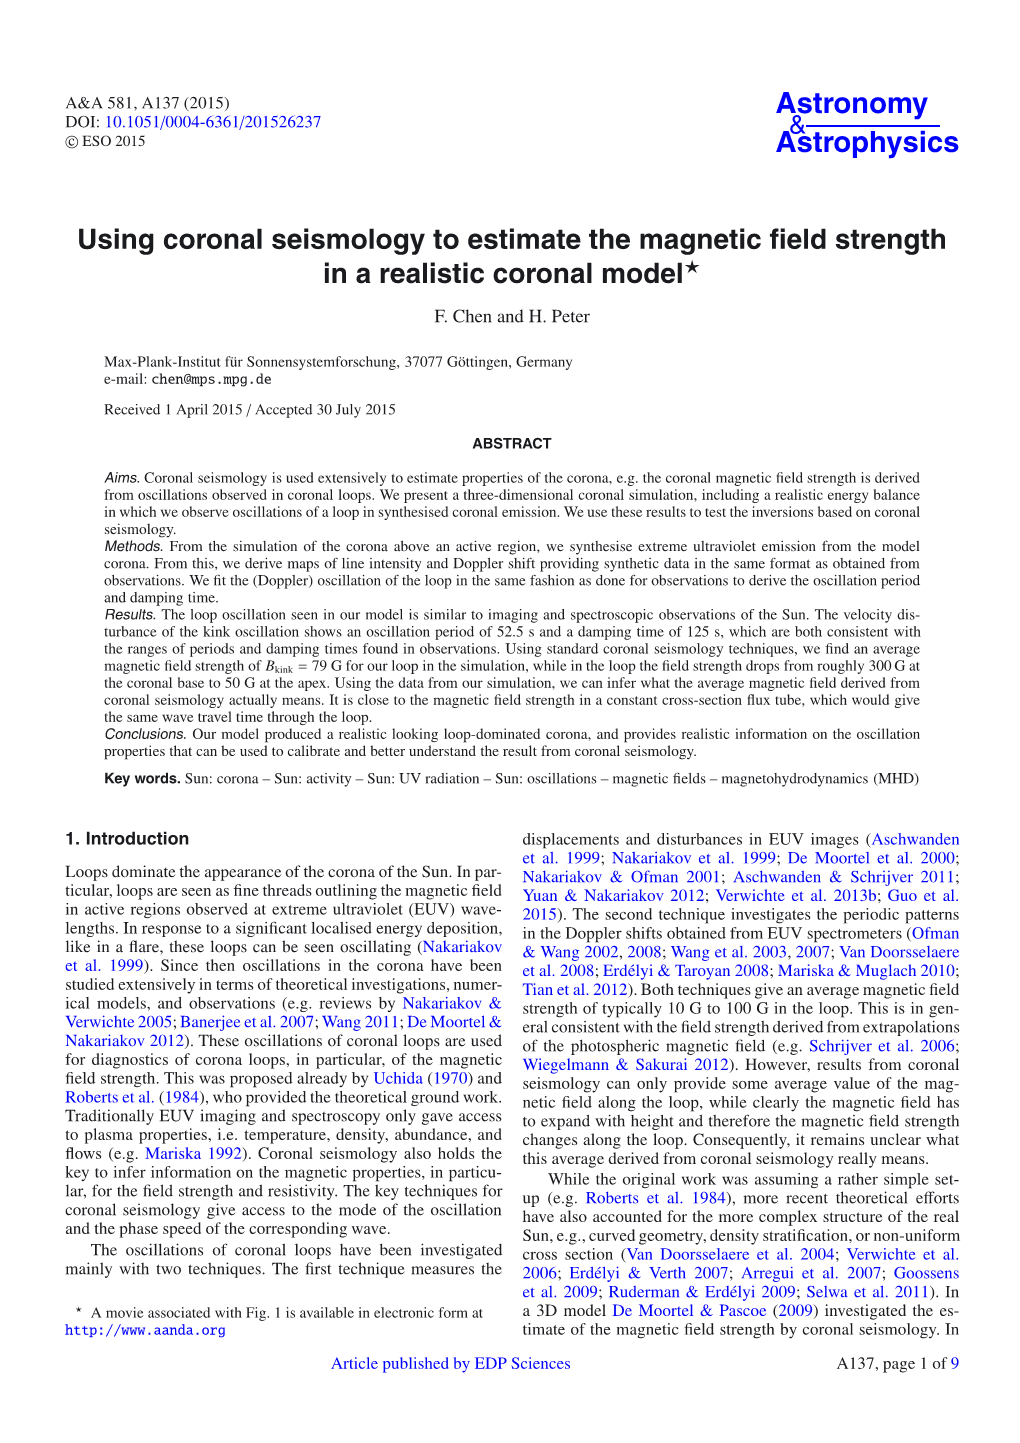 Using Coronal Seismology to Estimate the Magnetic ﬁeld Strength in a Realistic Coronal Model